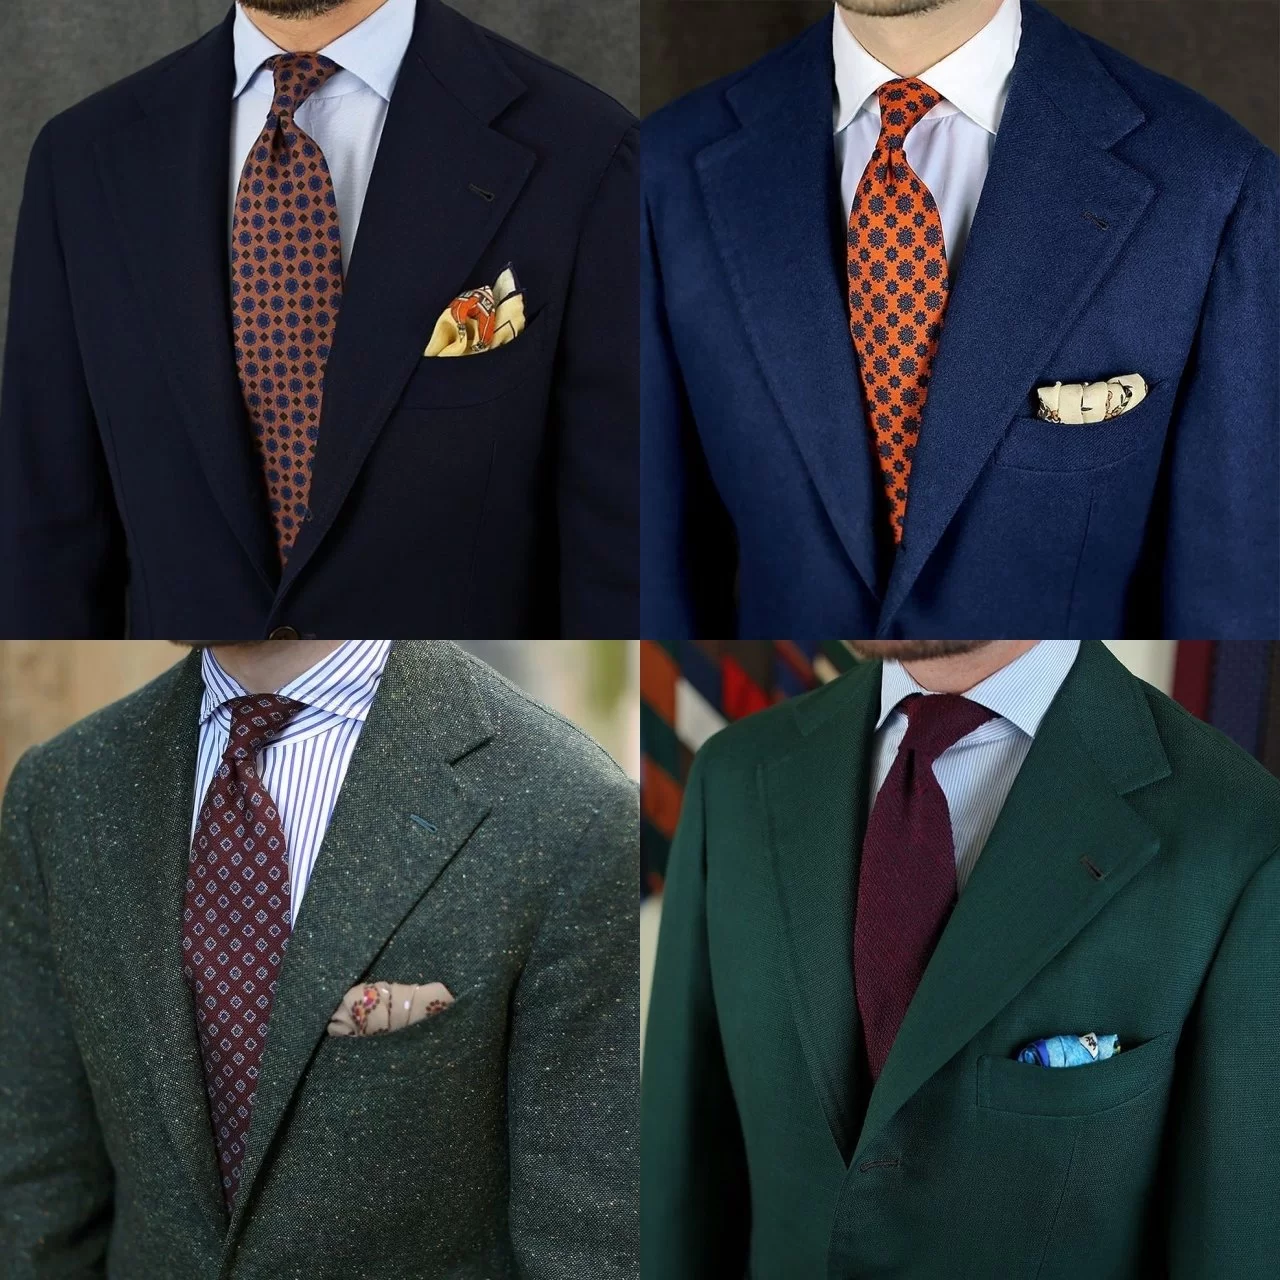 How to match a tie to shirt and suit or blazer - complimentary colors